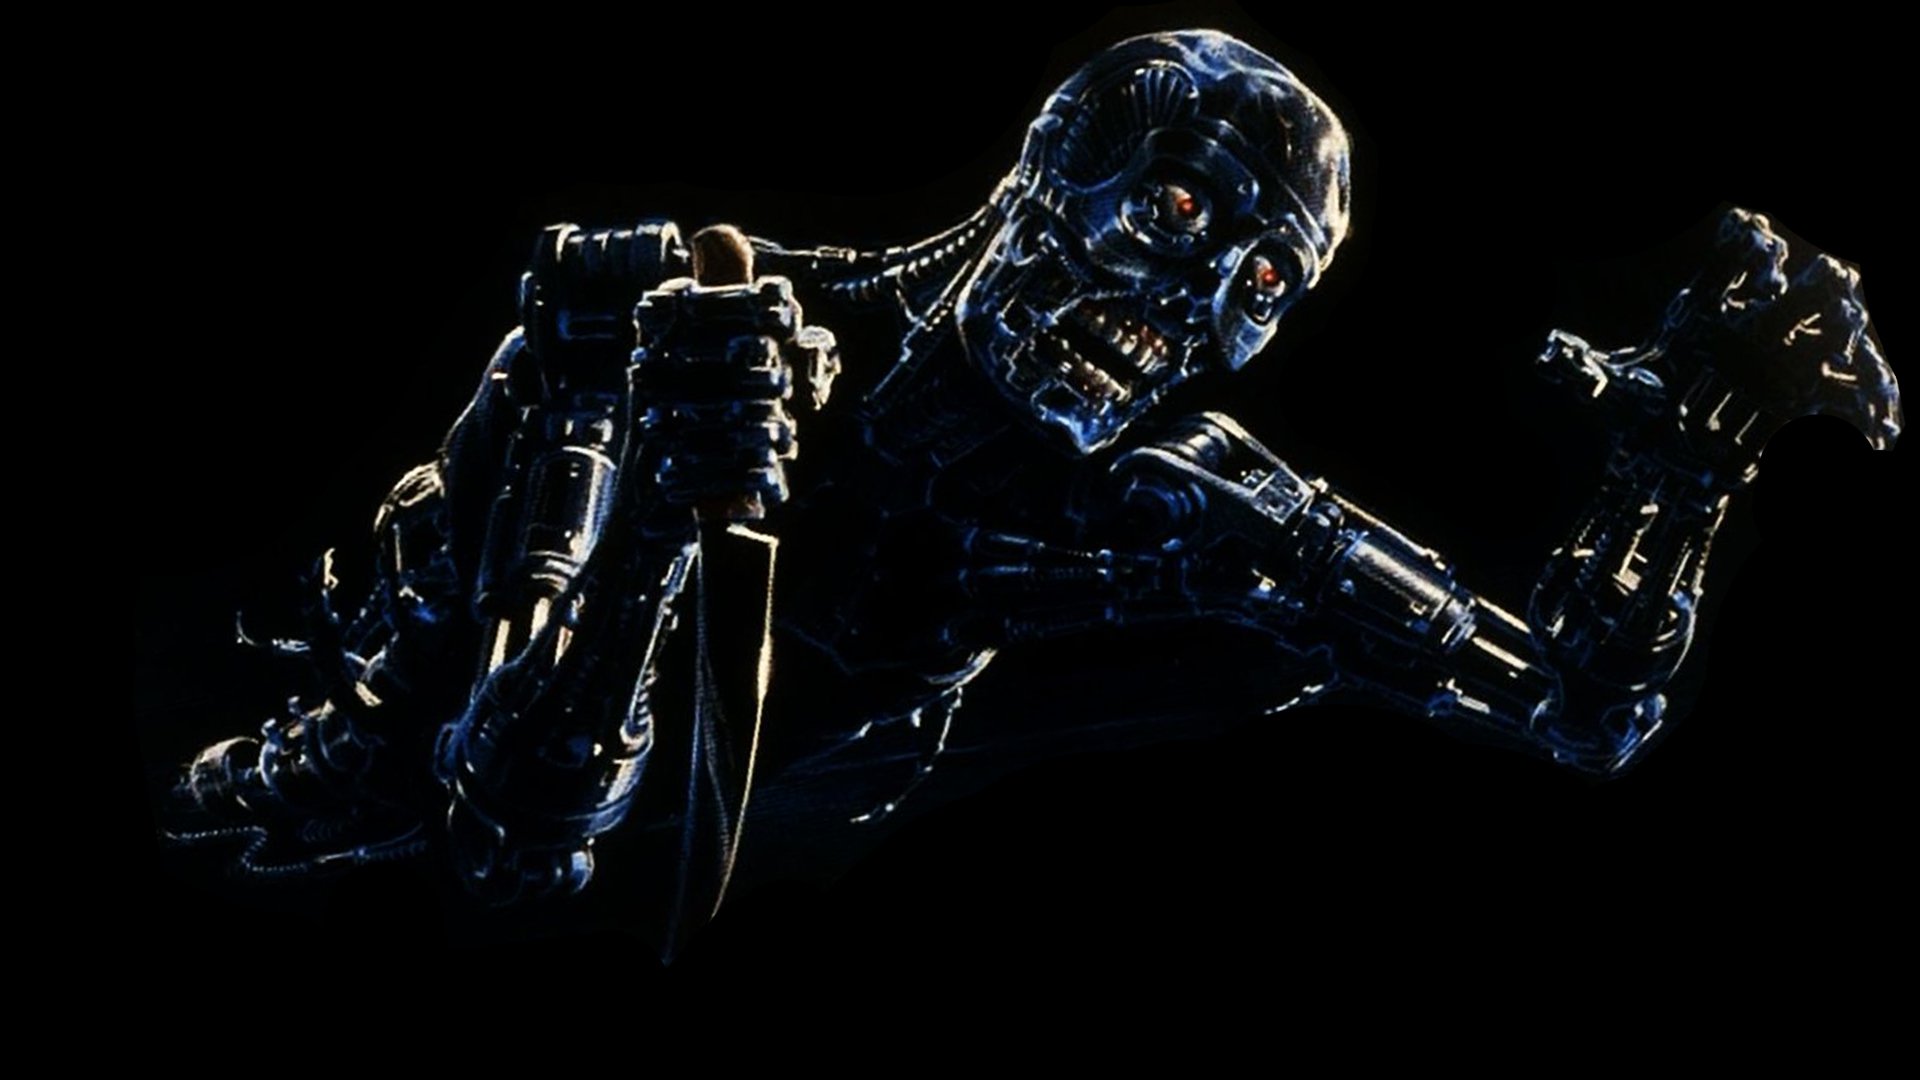 The Terminator Wallpapers Pictures Images HD Wallpapers Download Free Images Wallpaper [wallpaper981.blogspot.com]